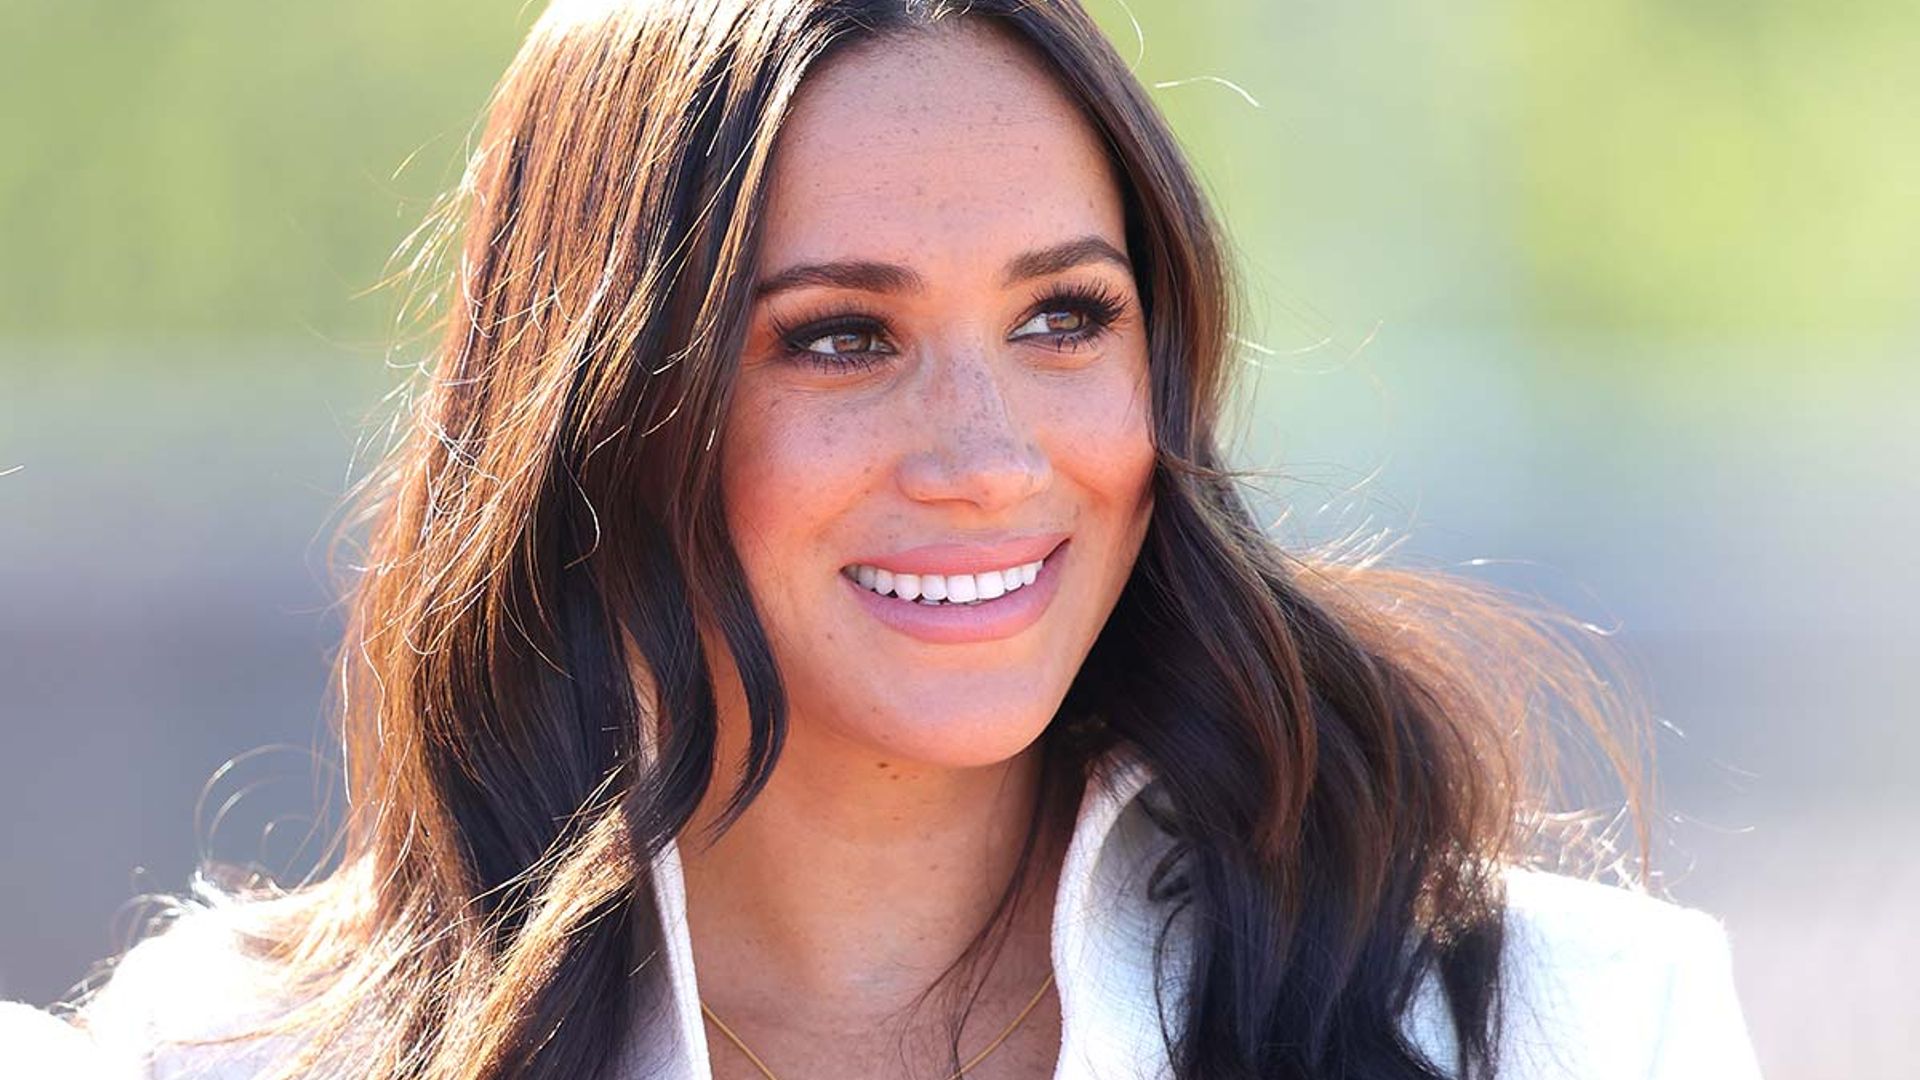 Meghan Markle swears by this one genius kitchen tool in her California home